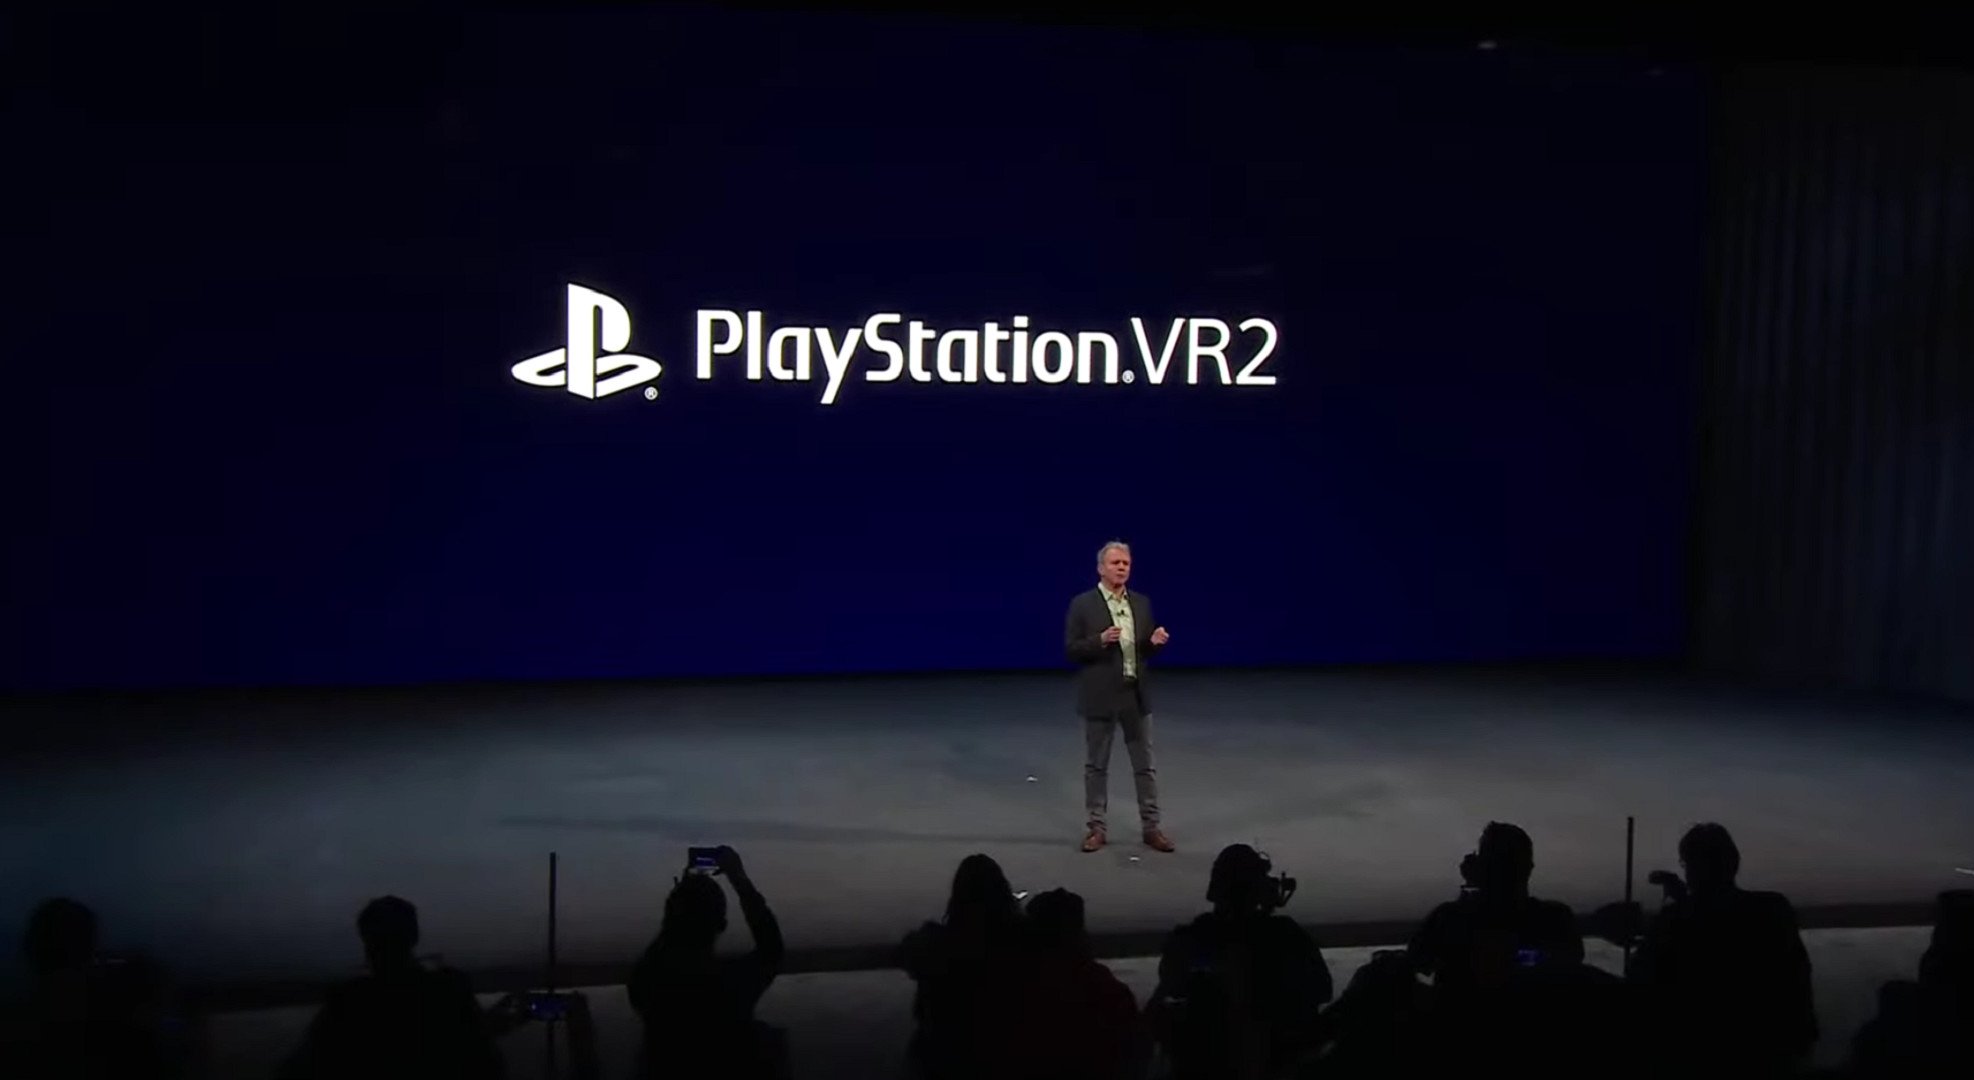 Sony releases PlayStation VR2 at the 2022 International Consumer Electronics Show